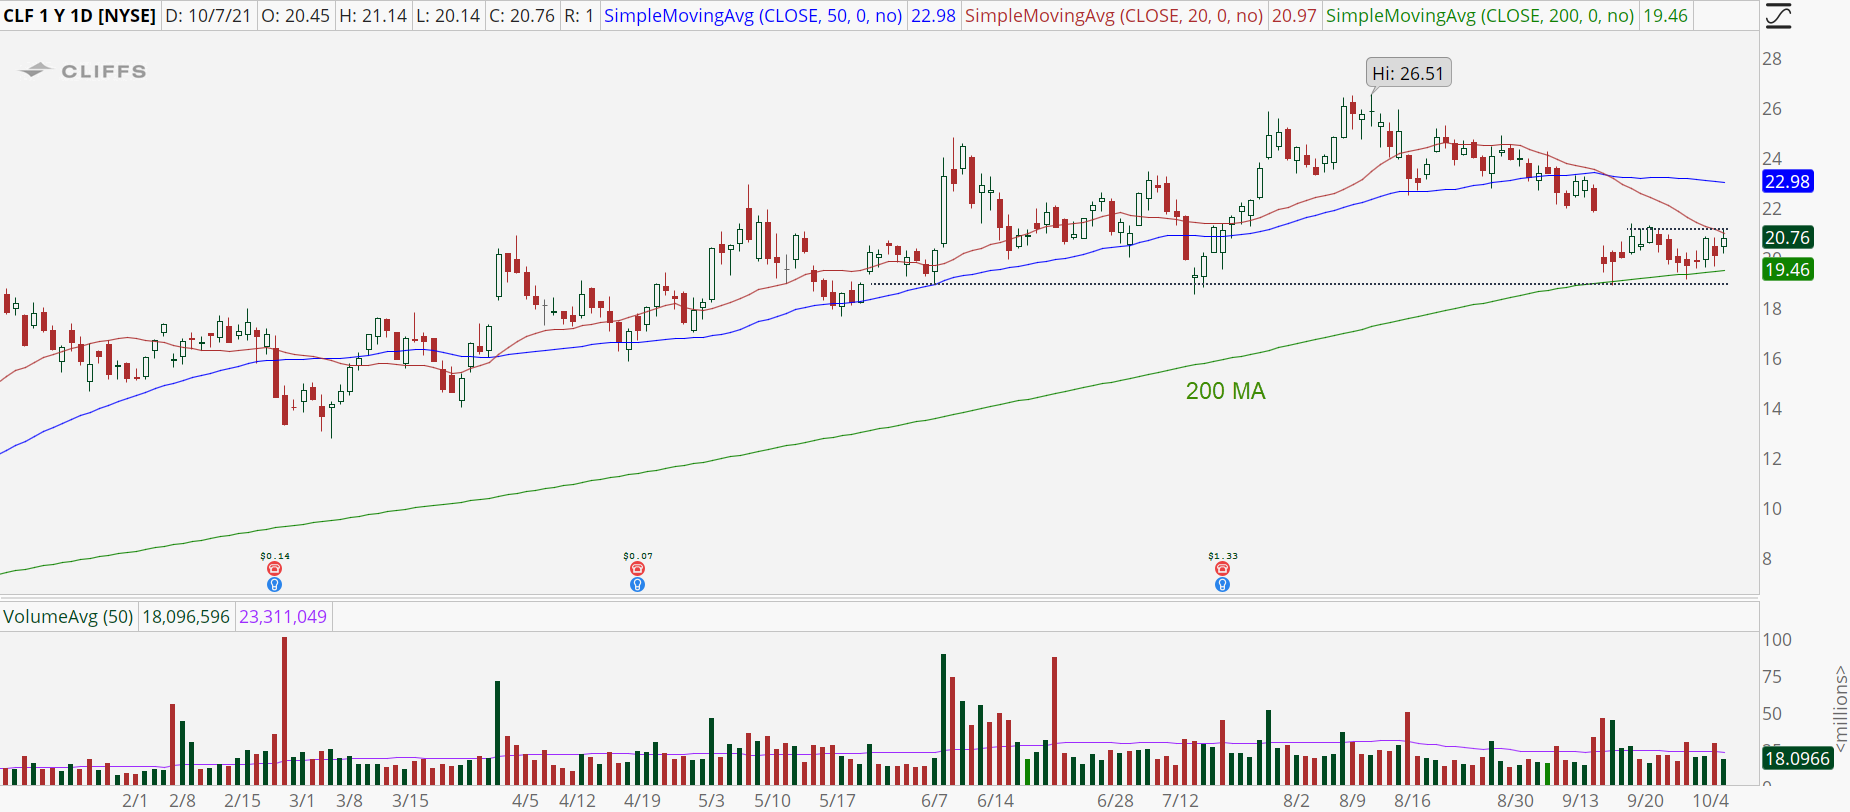 Cleveland-Cliffs (CLF) daily chart with 200-day moving average test.